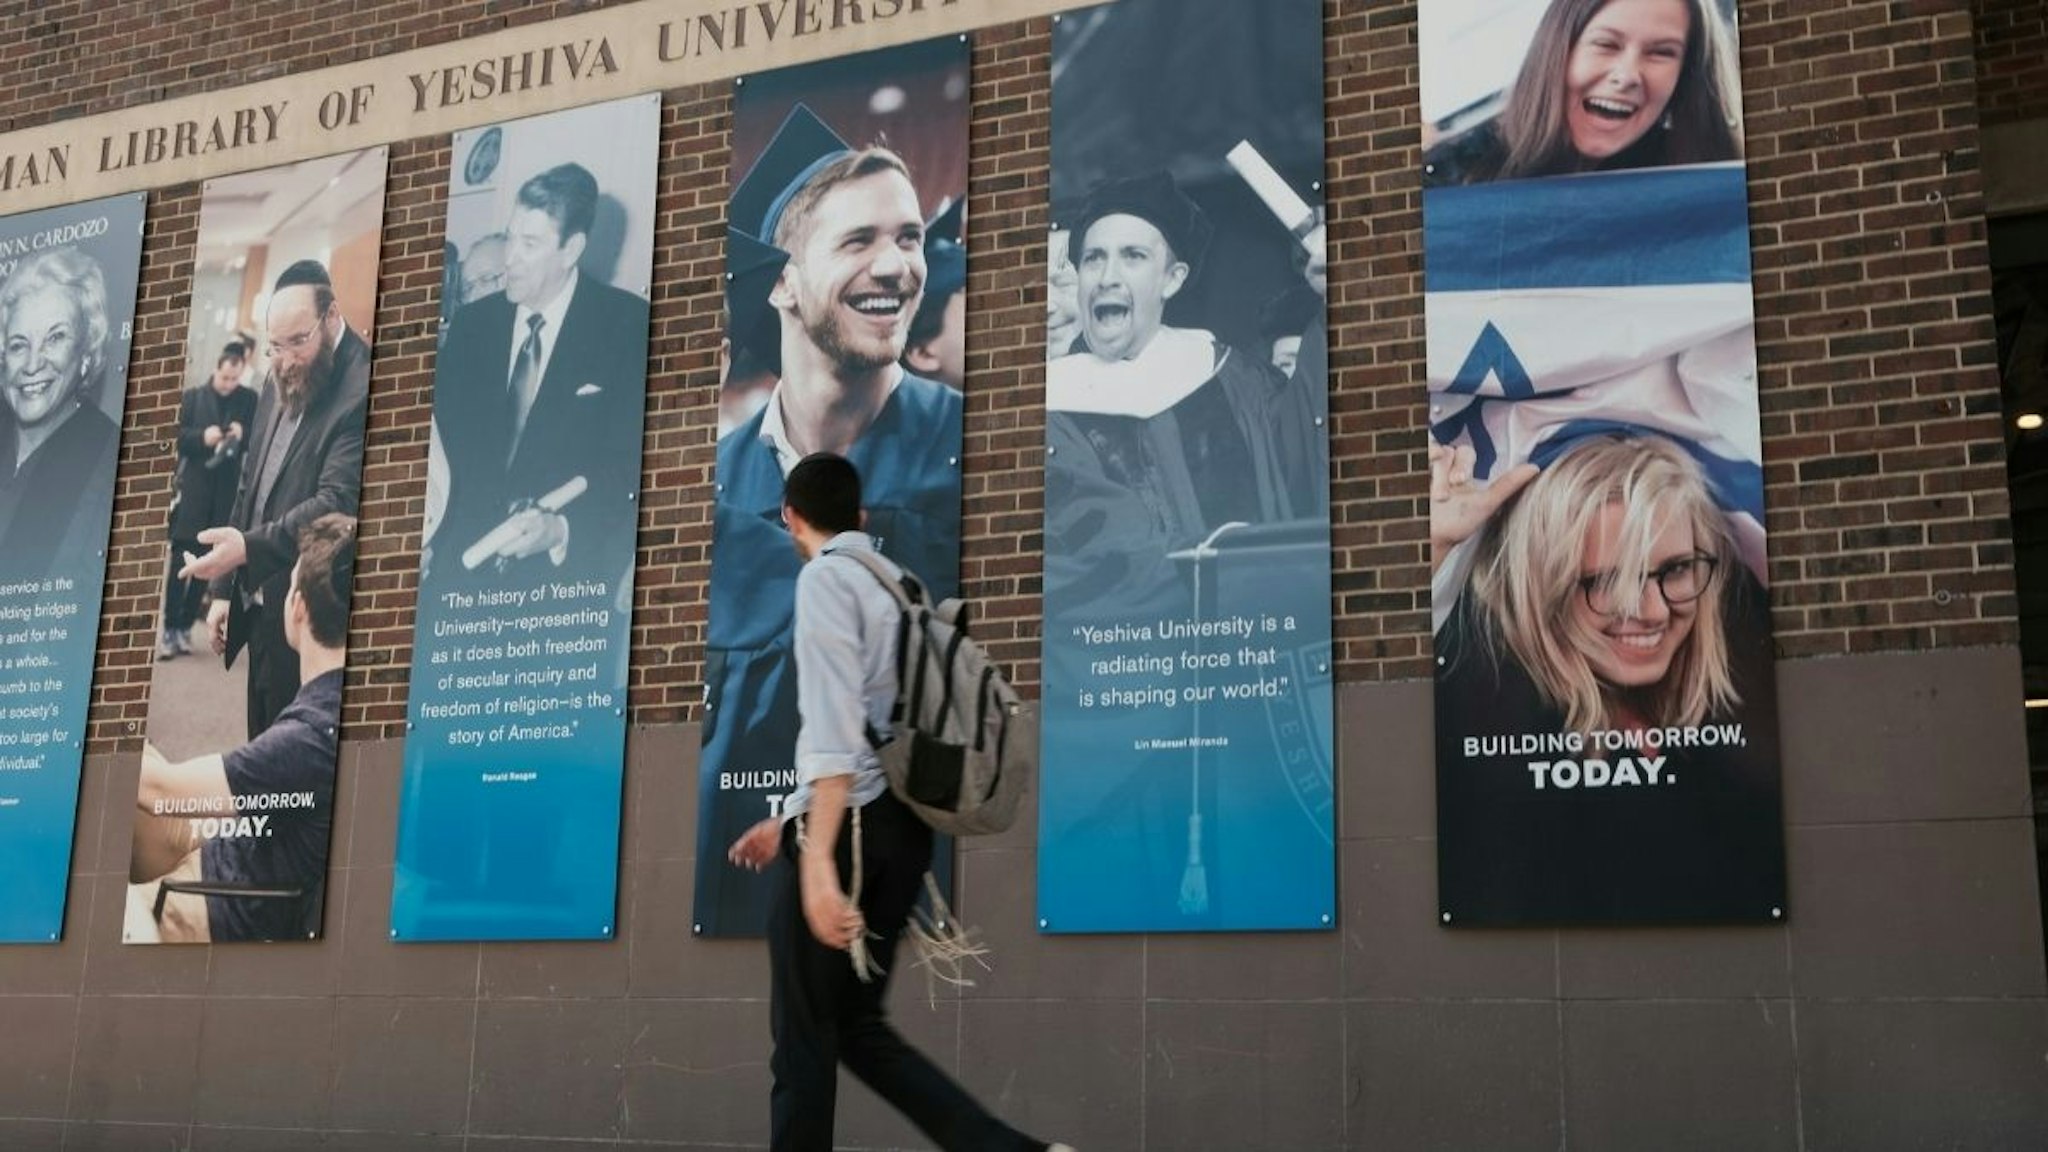 People walk by the campus of Yeshiva University in New York City on August 30, 2022 in New York City. Yeshiva University on Monday filed an emergency request with the Supreme Court asking it to block a judge’s order that requires the university to recognize an LGBTQ+ student group.